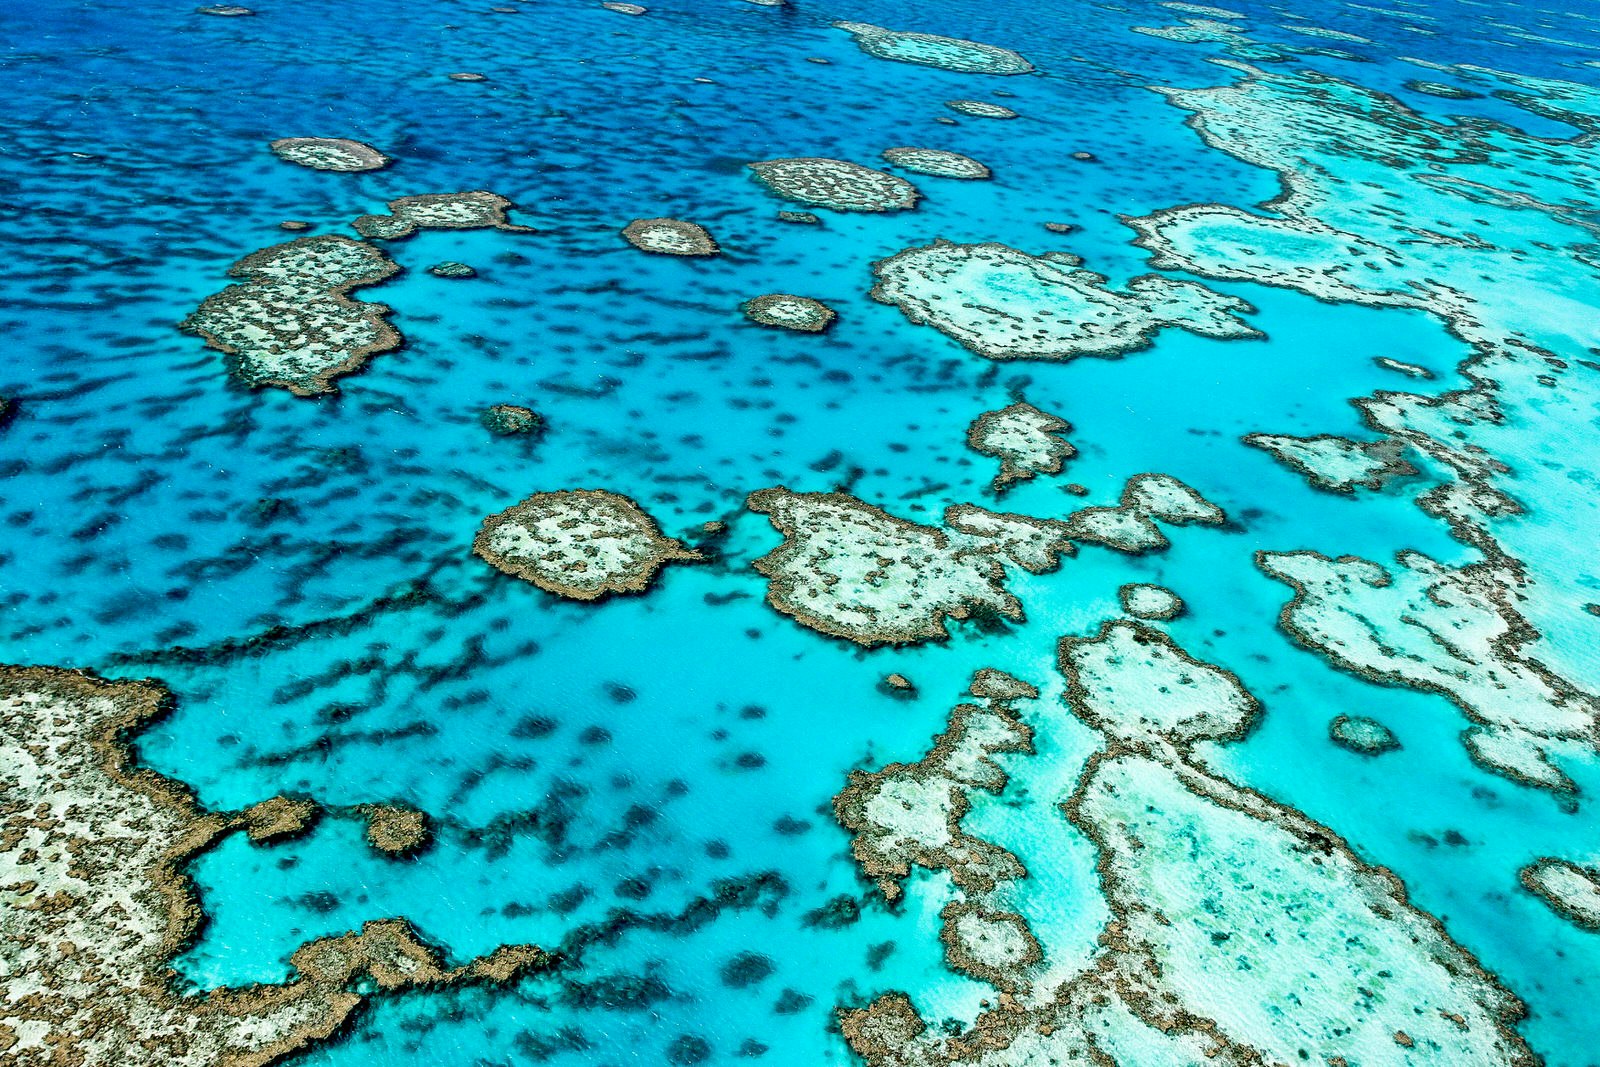 Aerial view of the coral formations of Australia's Great Barrier Reef, surrounded by clear blue water.